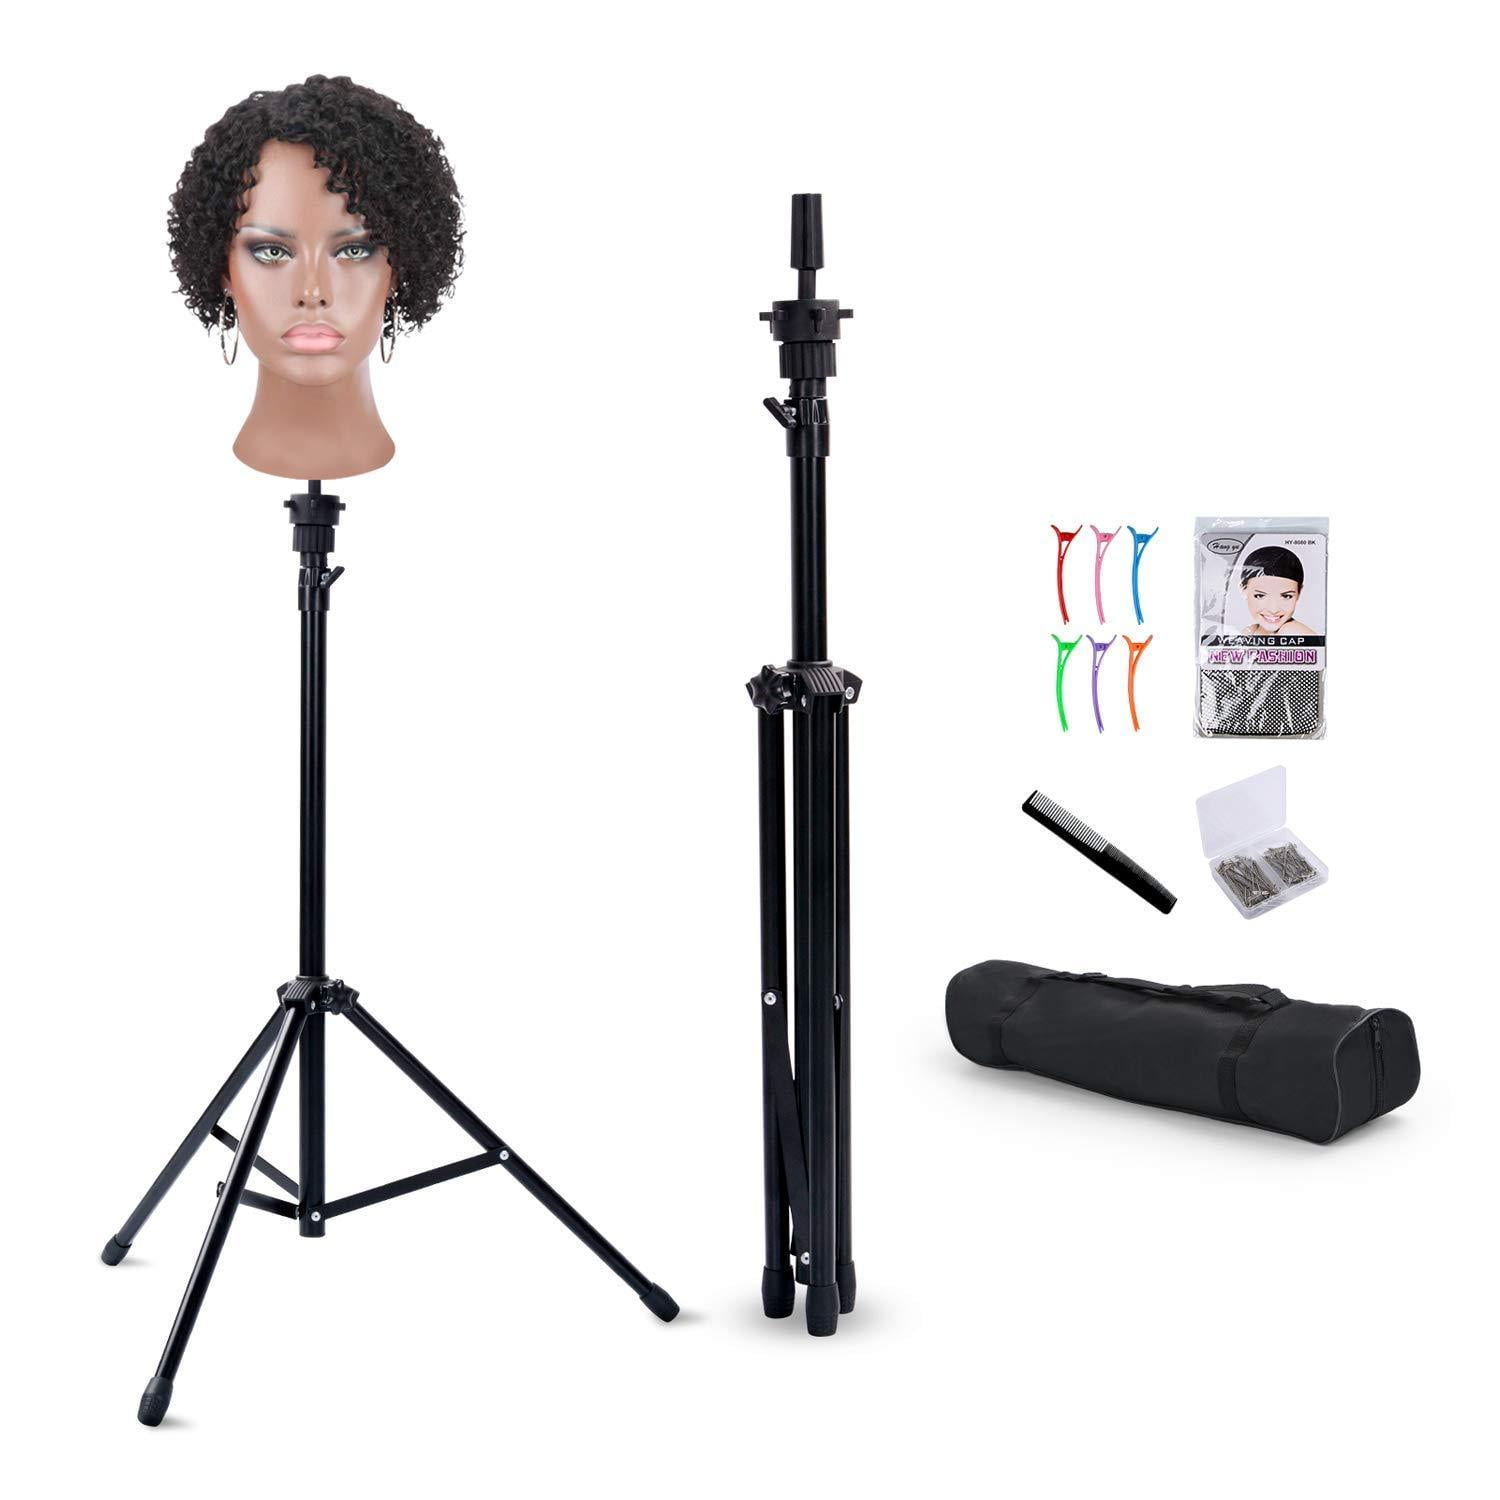 IvyBeauty Metal Adjustable Wig Stand Tripod Holder For Wigs Making